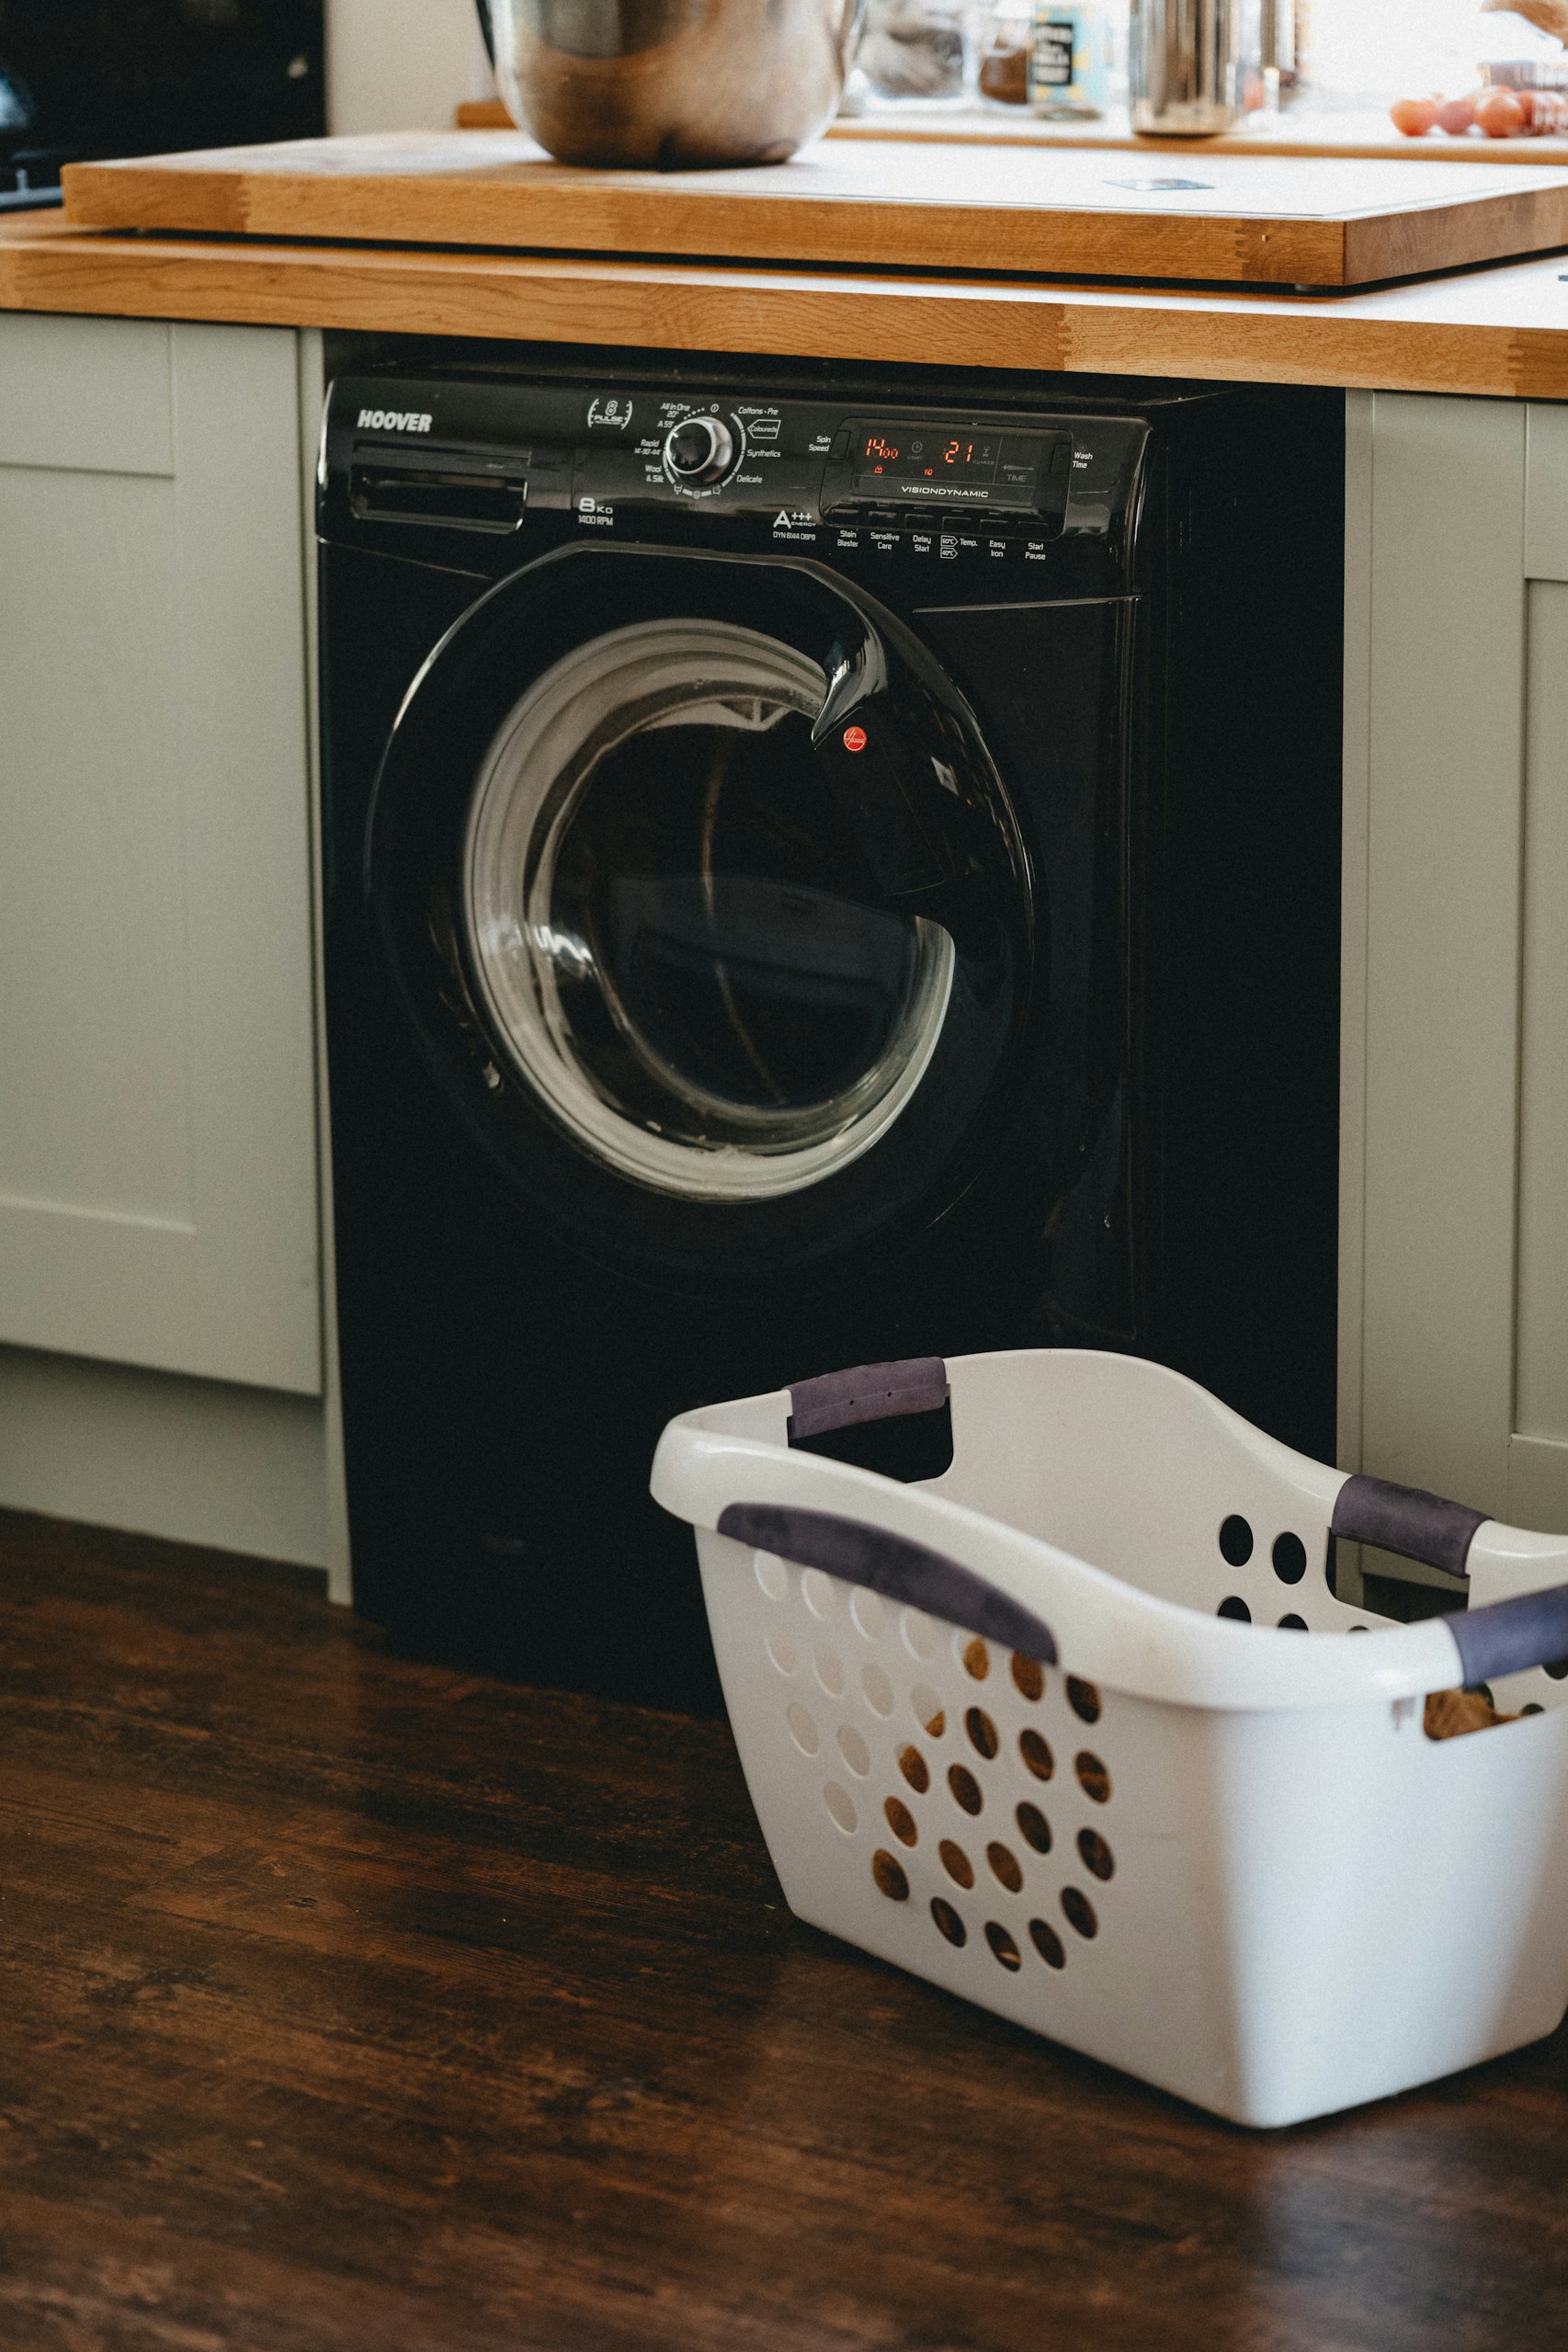 The washing machine and the laundry: new perspectives on leadership |  Lindsay Wittenberg